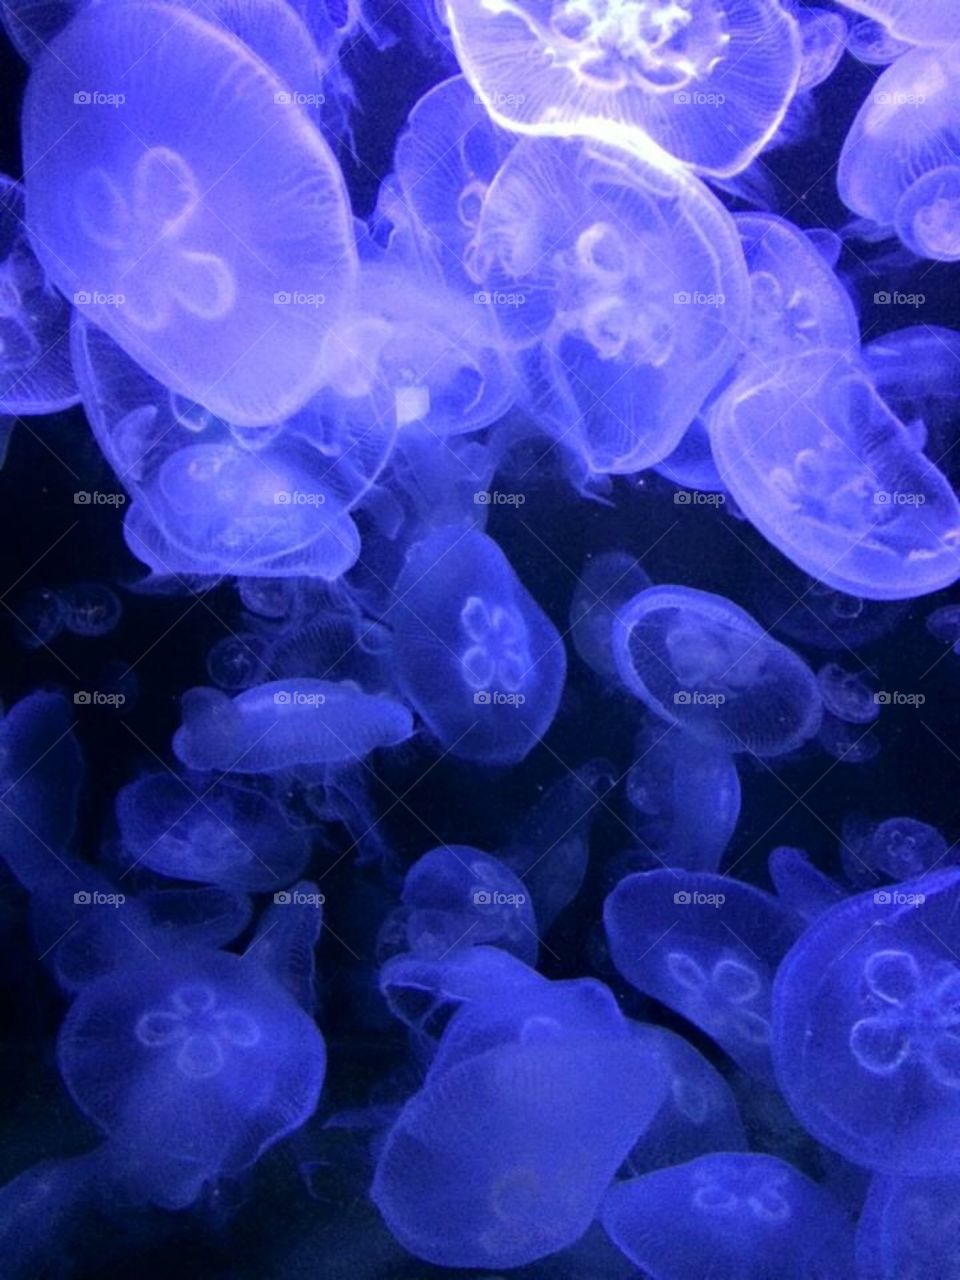 Electric jelly fish!